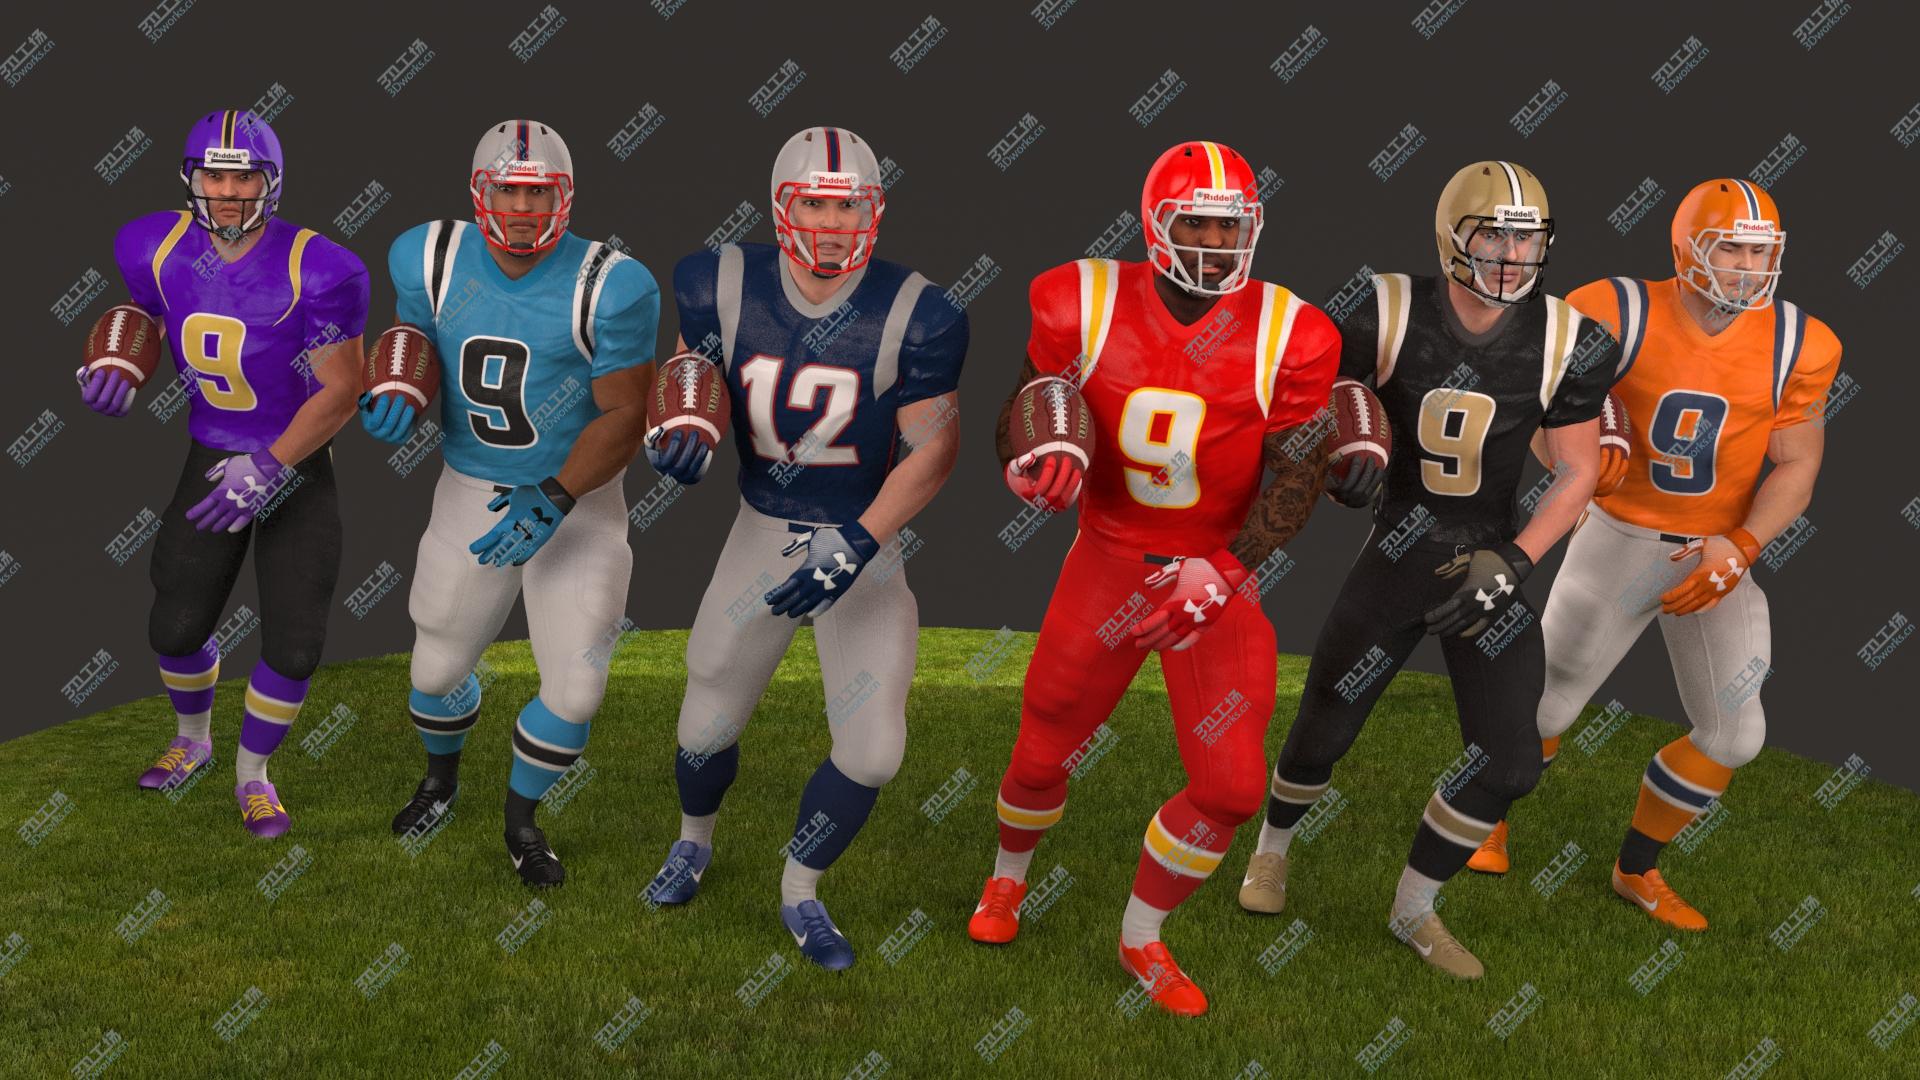 images/goods_img/20210313/American Football Player 2020 PBR Pack Rigged 3D/2.jpg